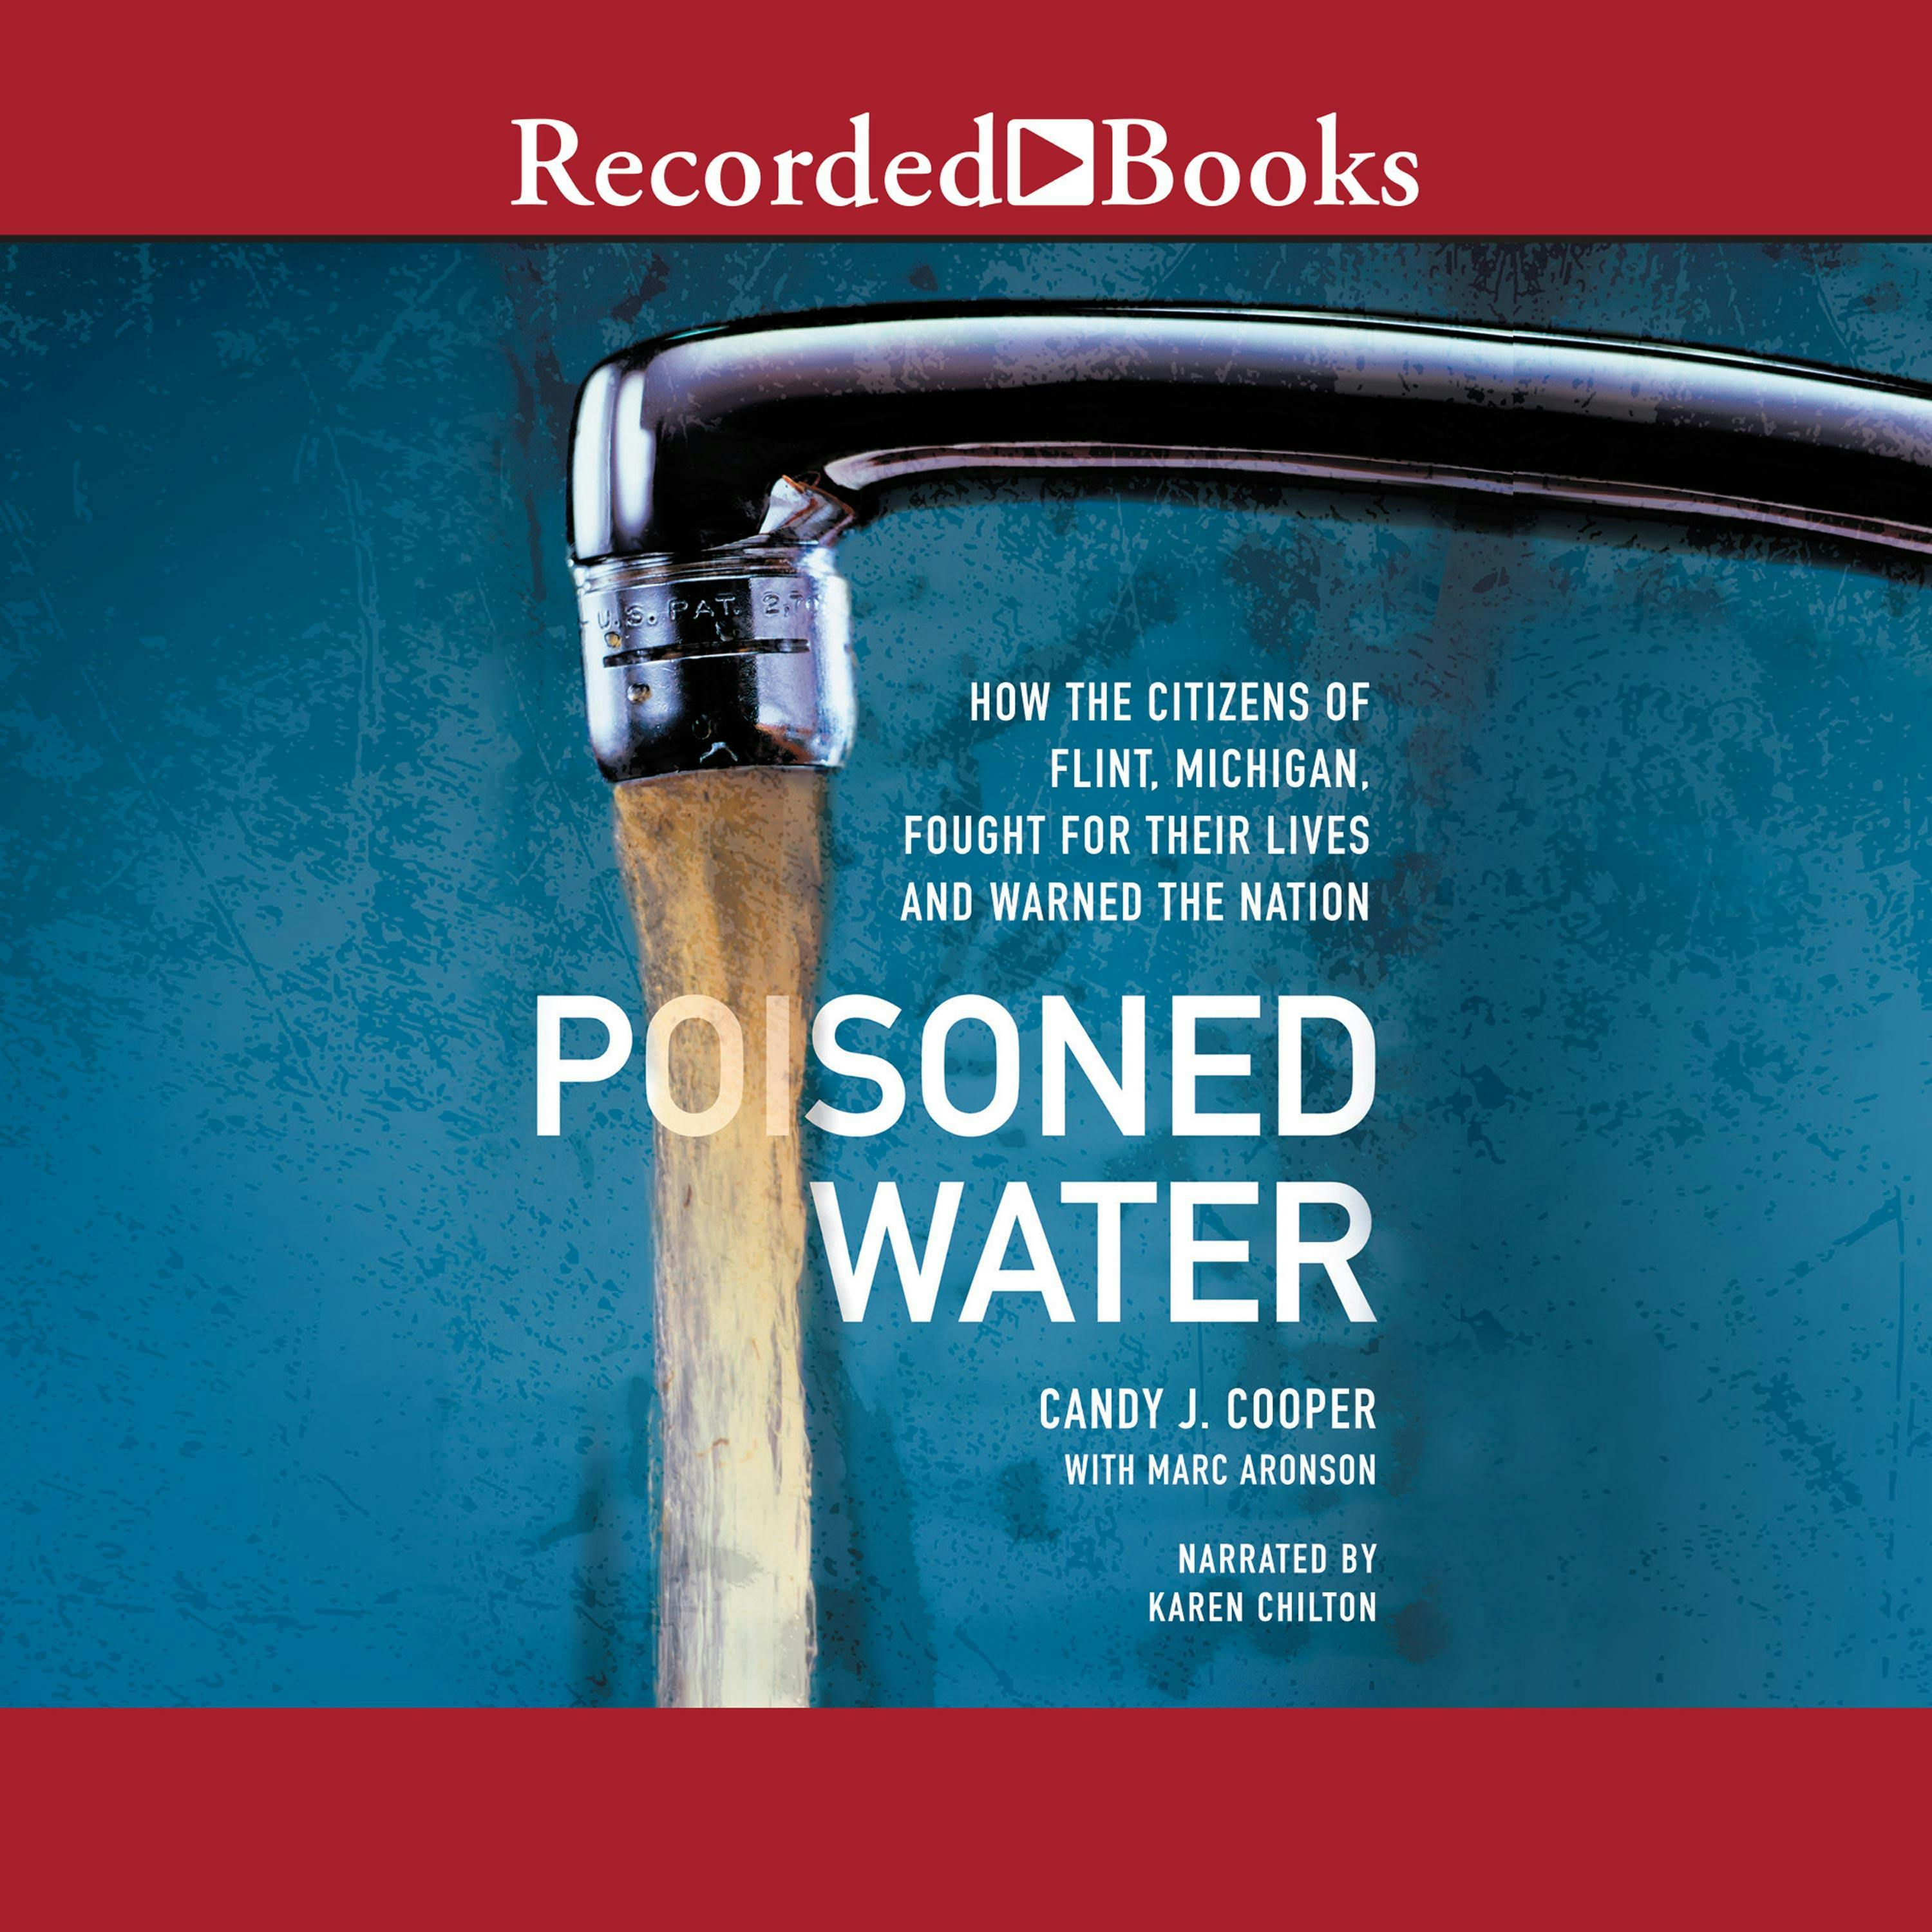 Poisoned Water: How The Citizens Of Flint, Michigan, Fought For Their Lives And Warned A Nation - Candy J. Cooper, Marc Aronson